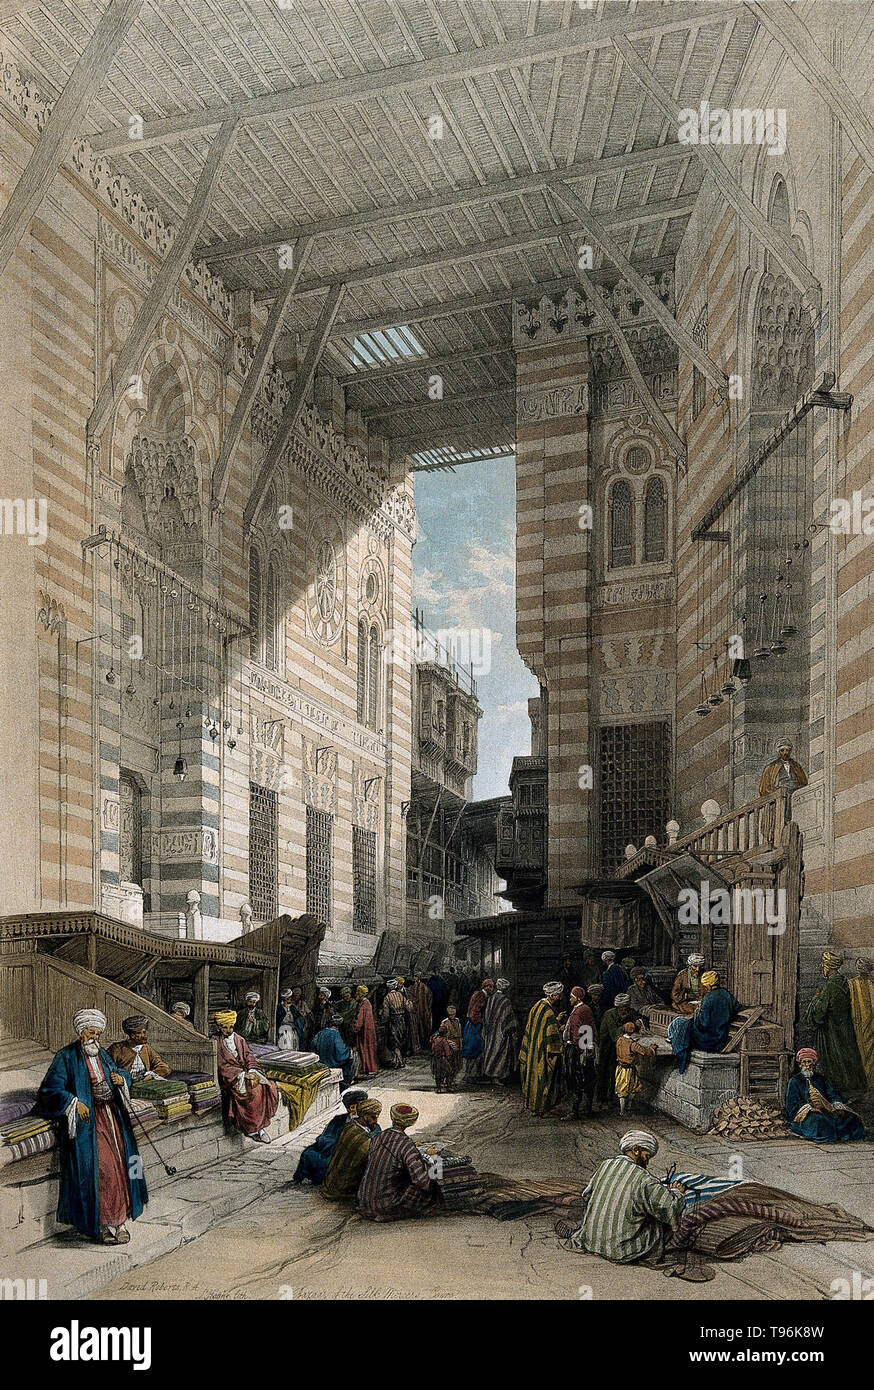 The bazaar of the silk merchants in Cairo with a man smoking a long-stemmed pipe. A bazaar is a permanently enclosed marketplace or street where goods and services are exchanged or sold. Colored lithograph by L. Haghe, c. 1848, after David Roberts. Stock Photo